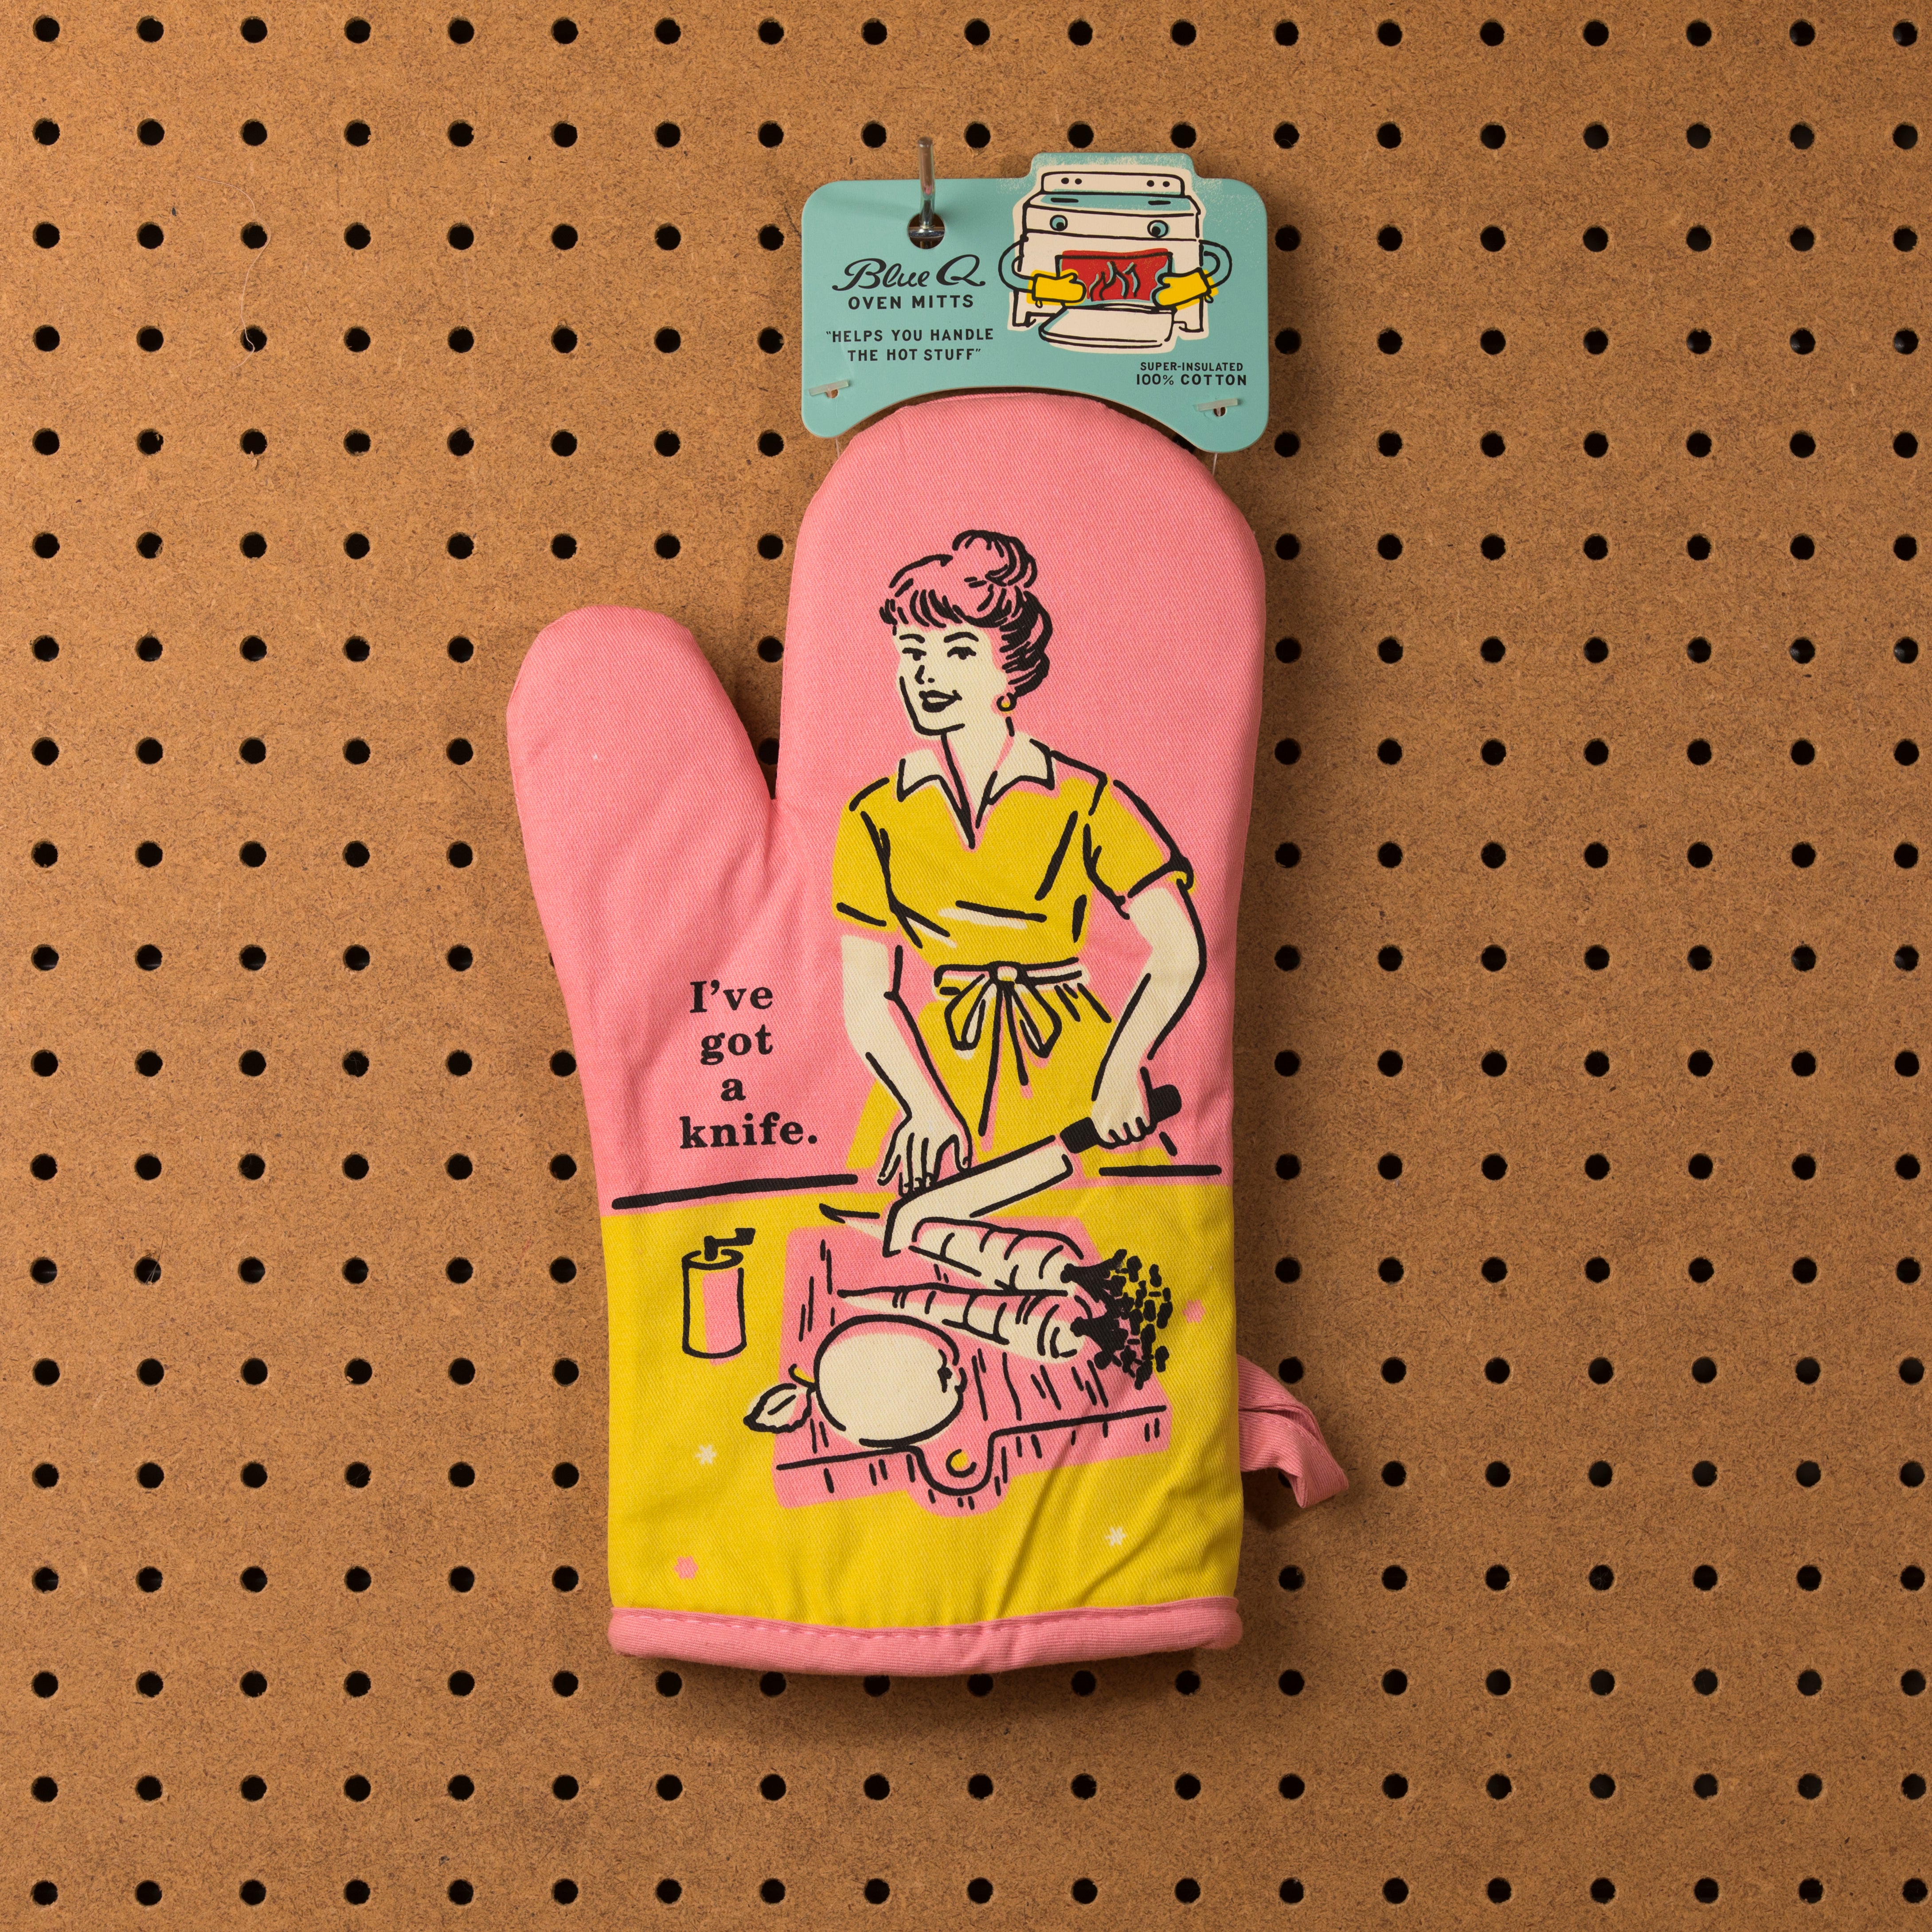 Here are the oven mitts that finally helped me get my kid cooking. Spoiler:  They're not mitts!